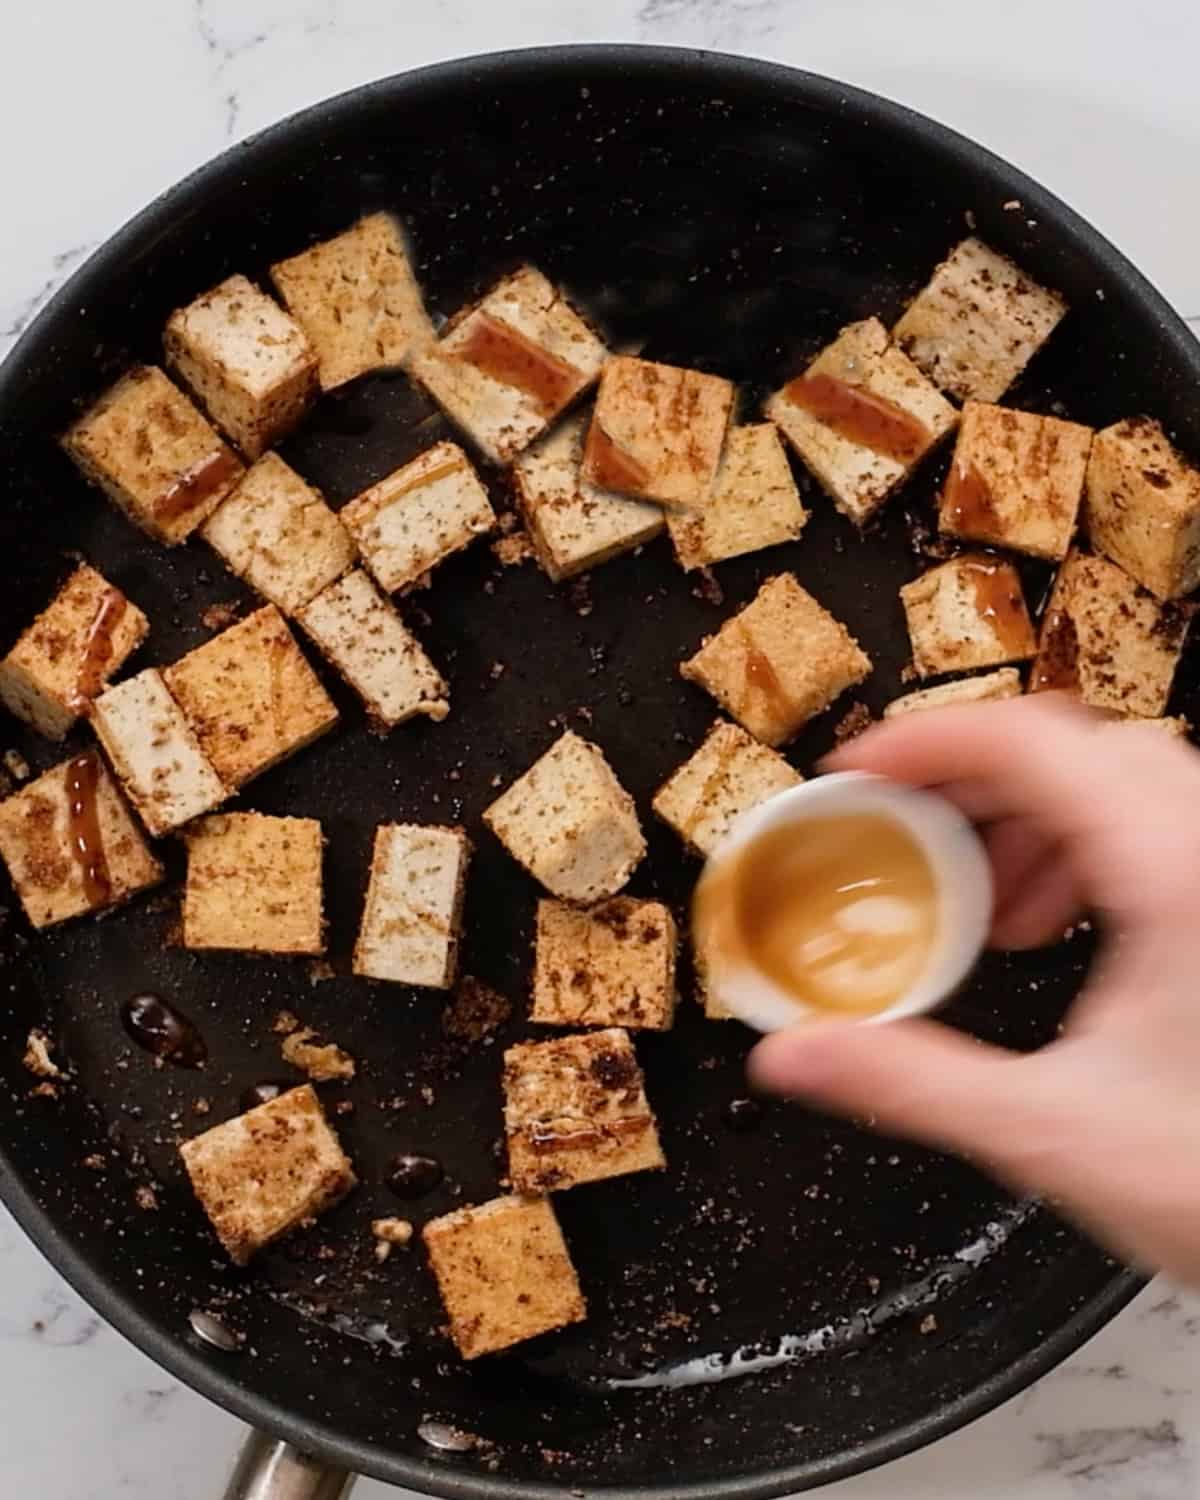 hoisin sauce being drizzled over tofu in a pan